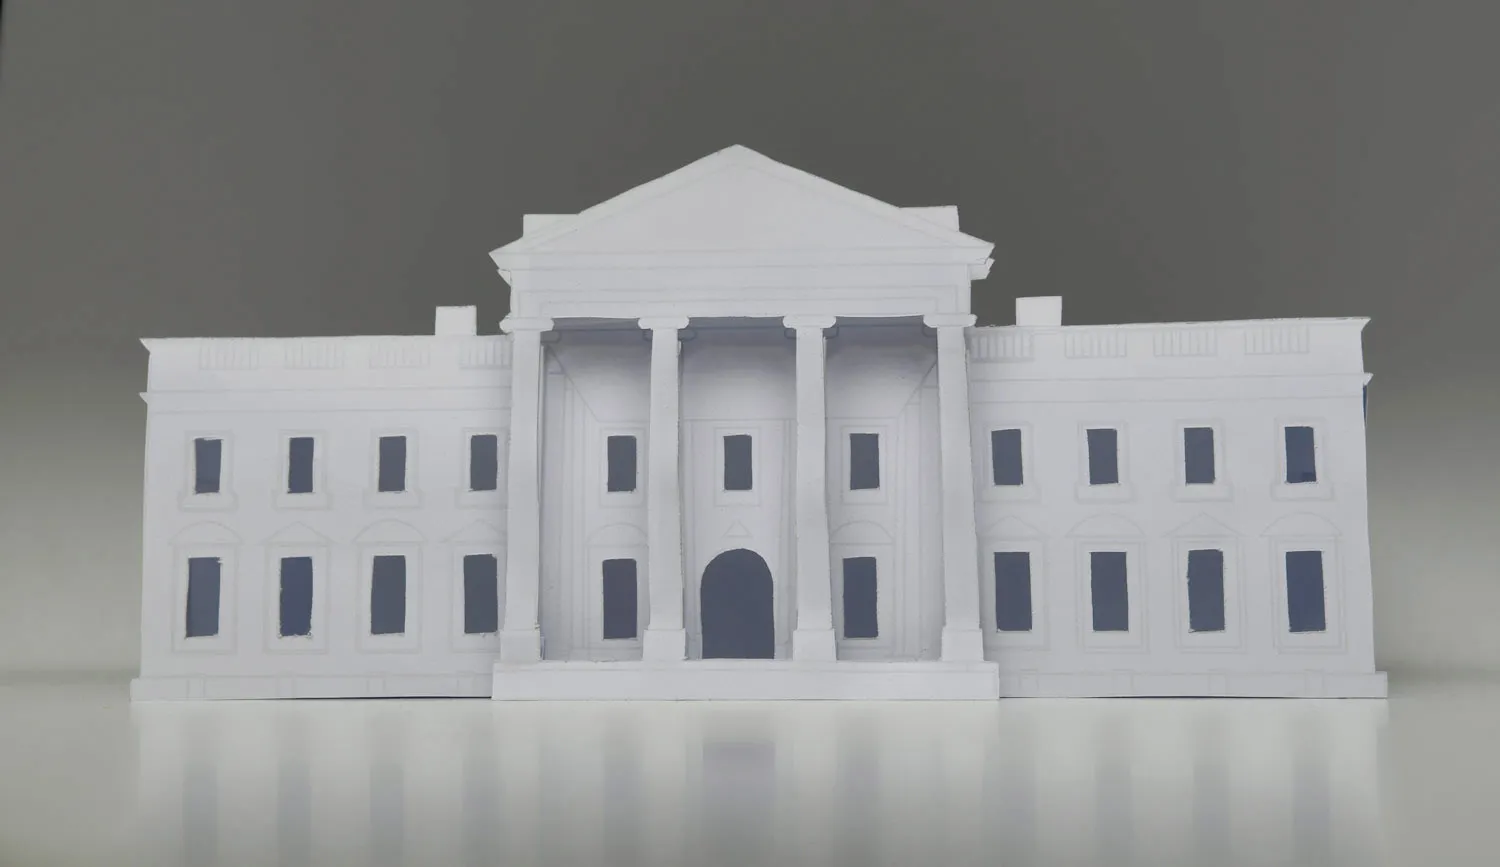 The White House made out of paper